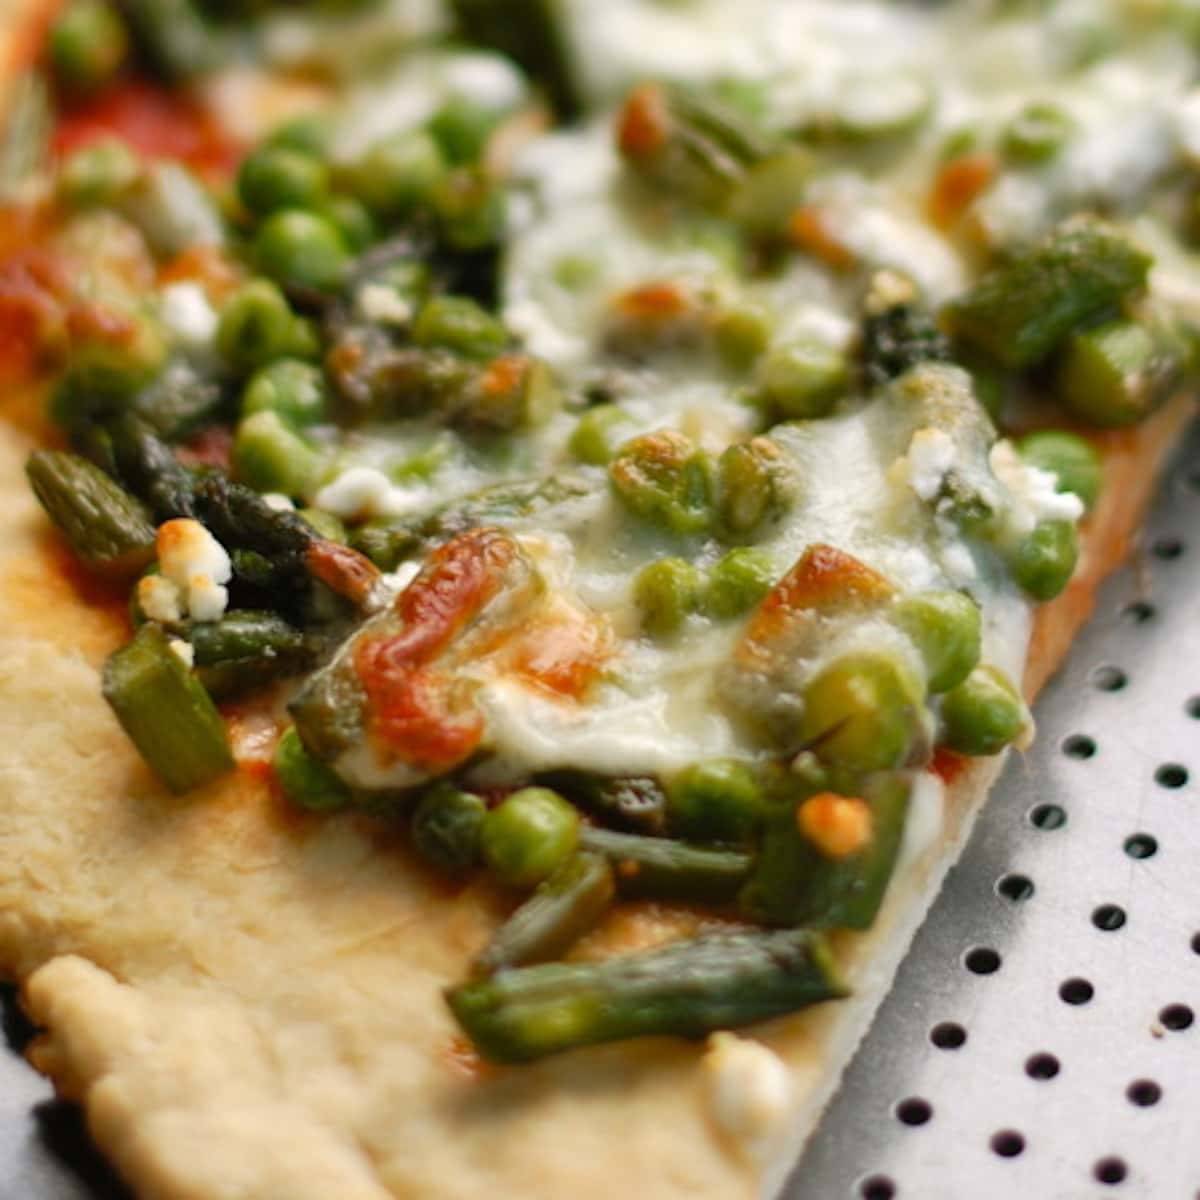 Asparagus, peas, and goat cheese pizza.